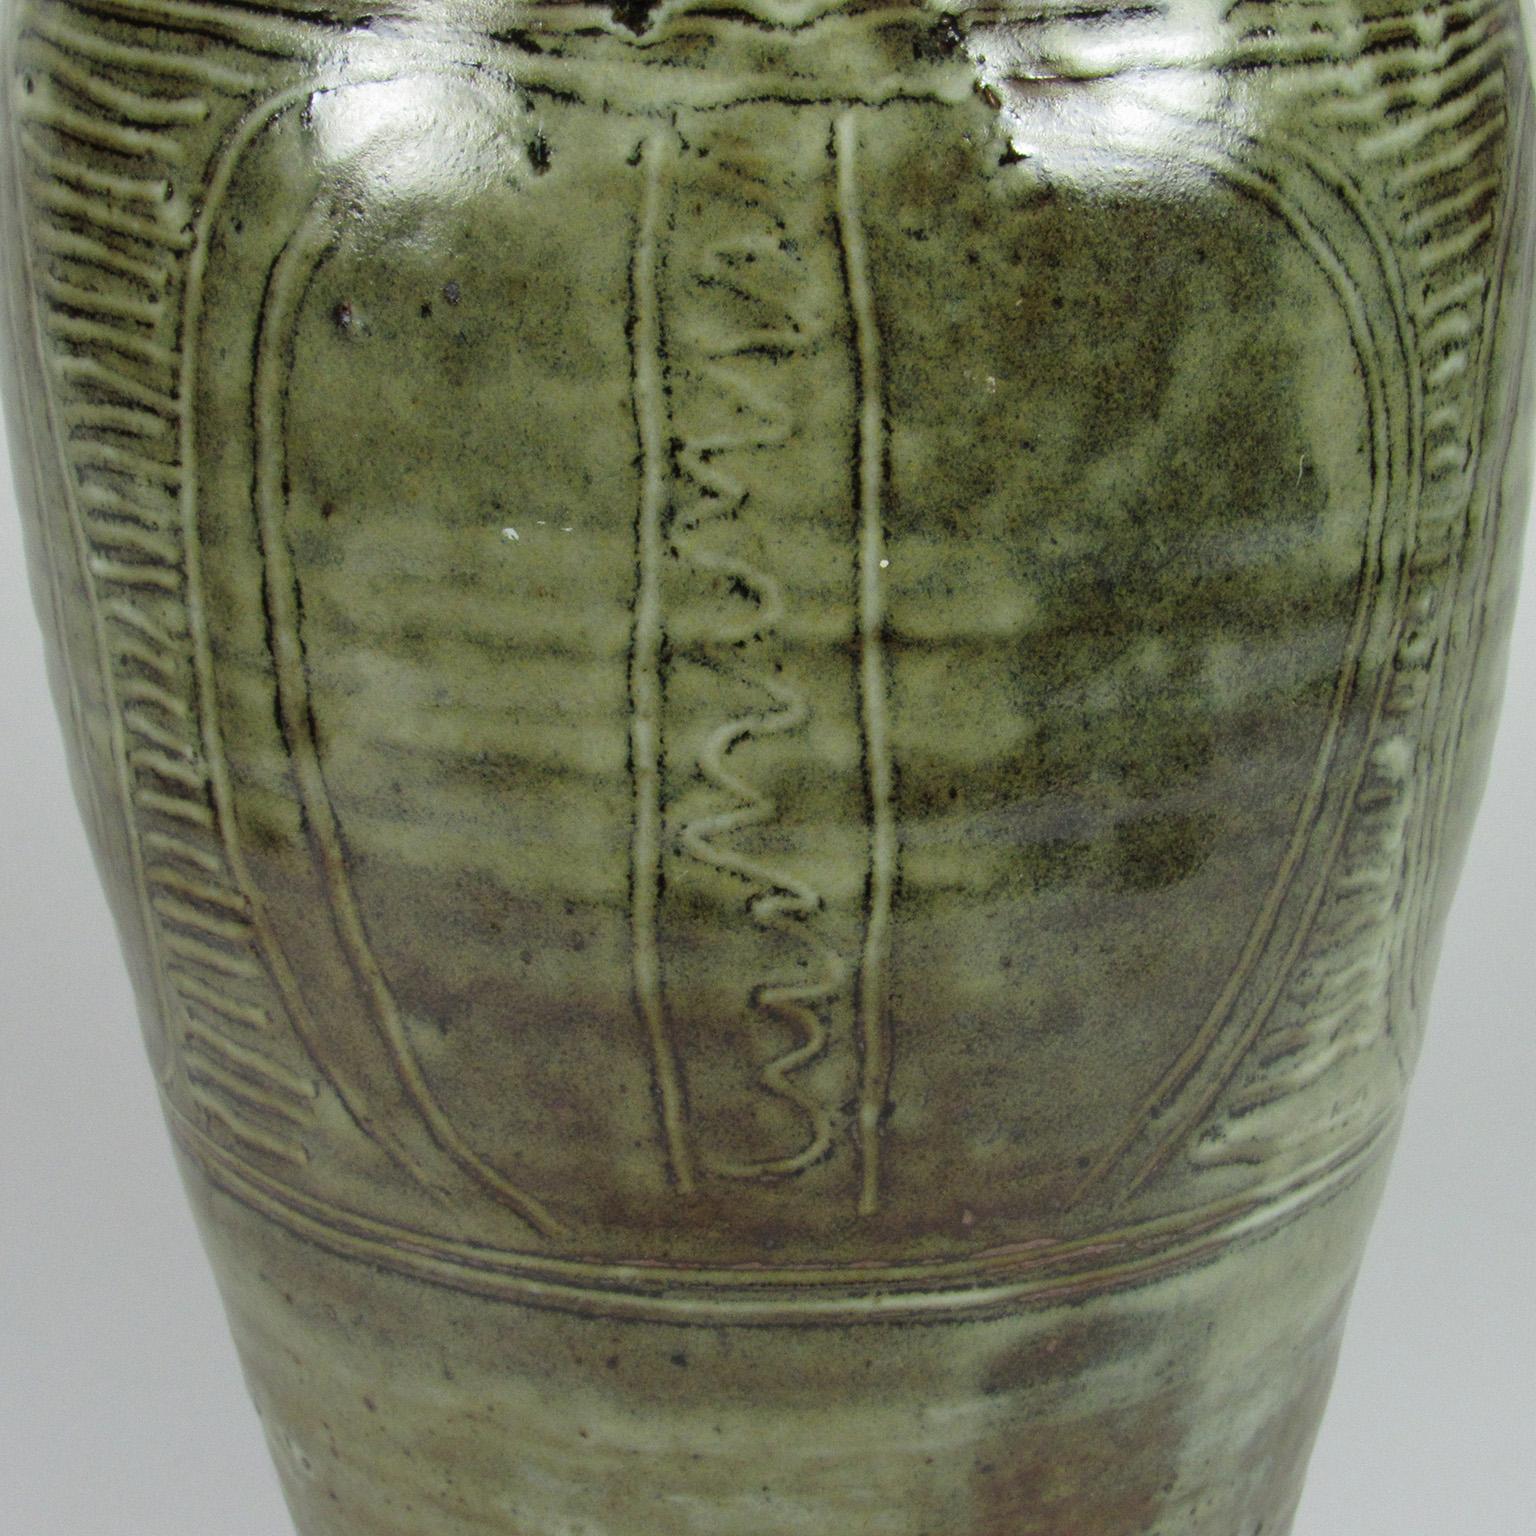 Nigerian mid-20th century Abuja Pottery four handled vase by Bawa Ushafa under Michael Cardew. This elegant tall vase has incised decoration with a celadon green and oxidized iron red glaze. Signed on foot 